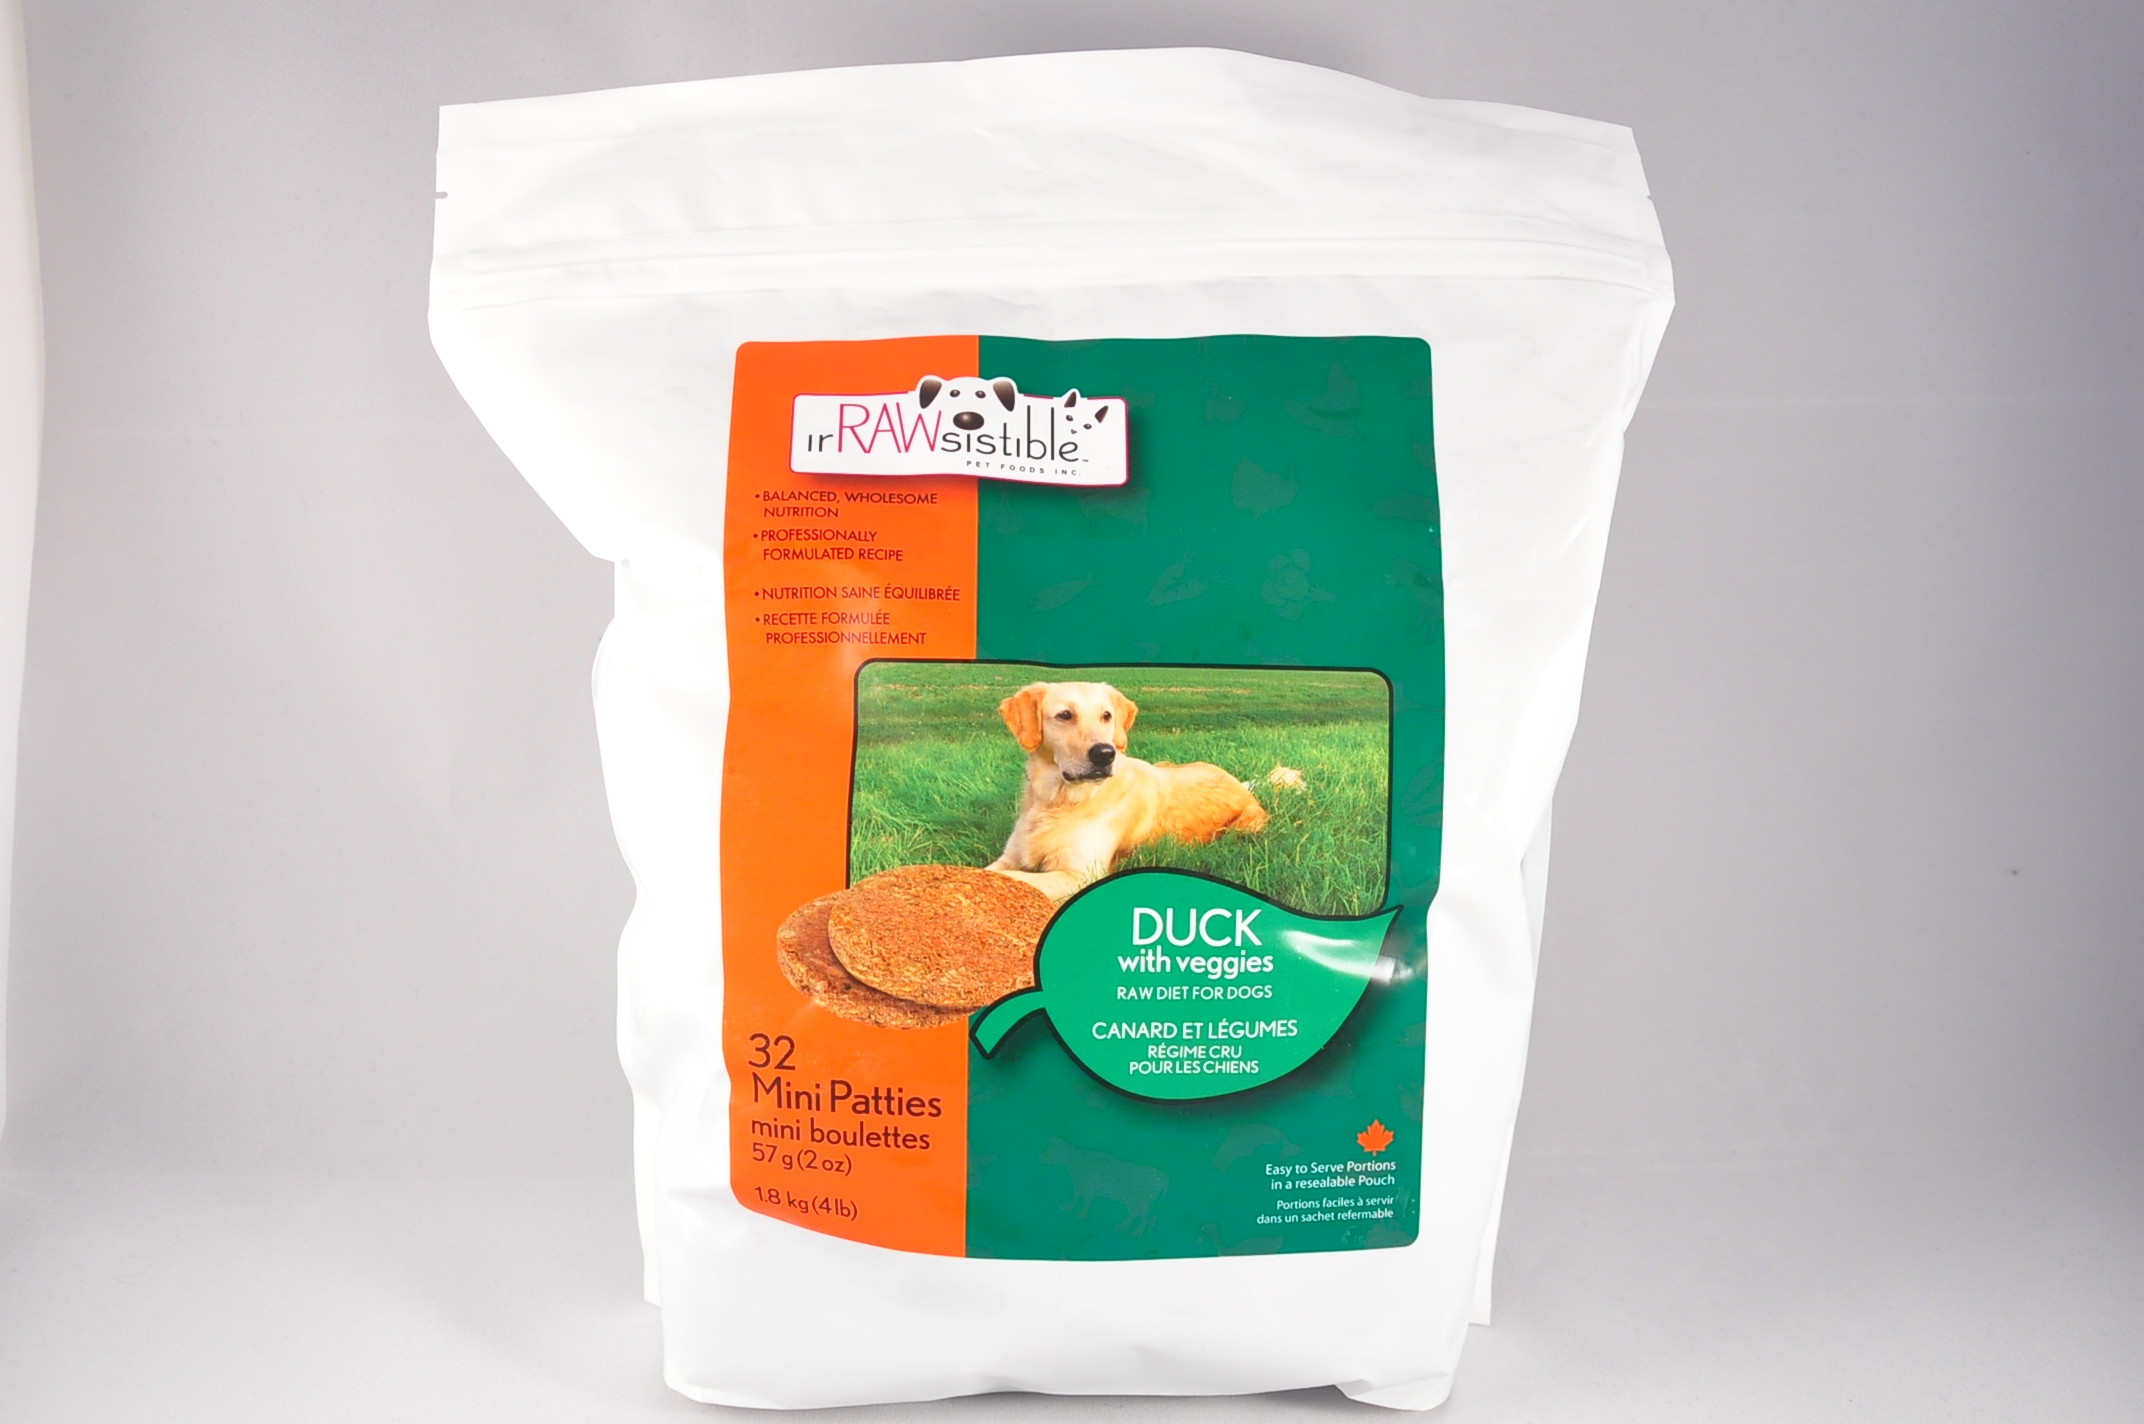 online raw dog food suppliers